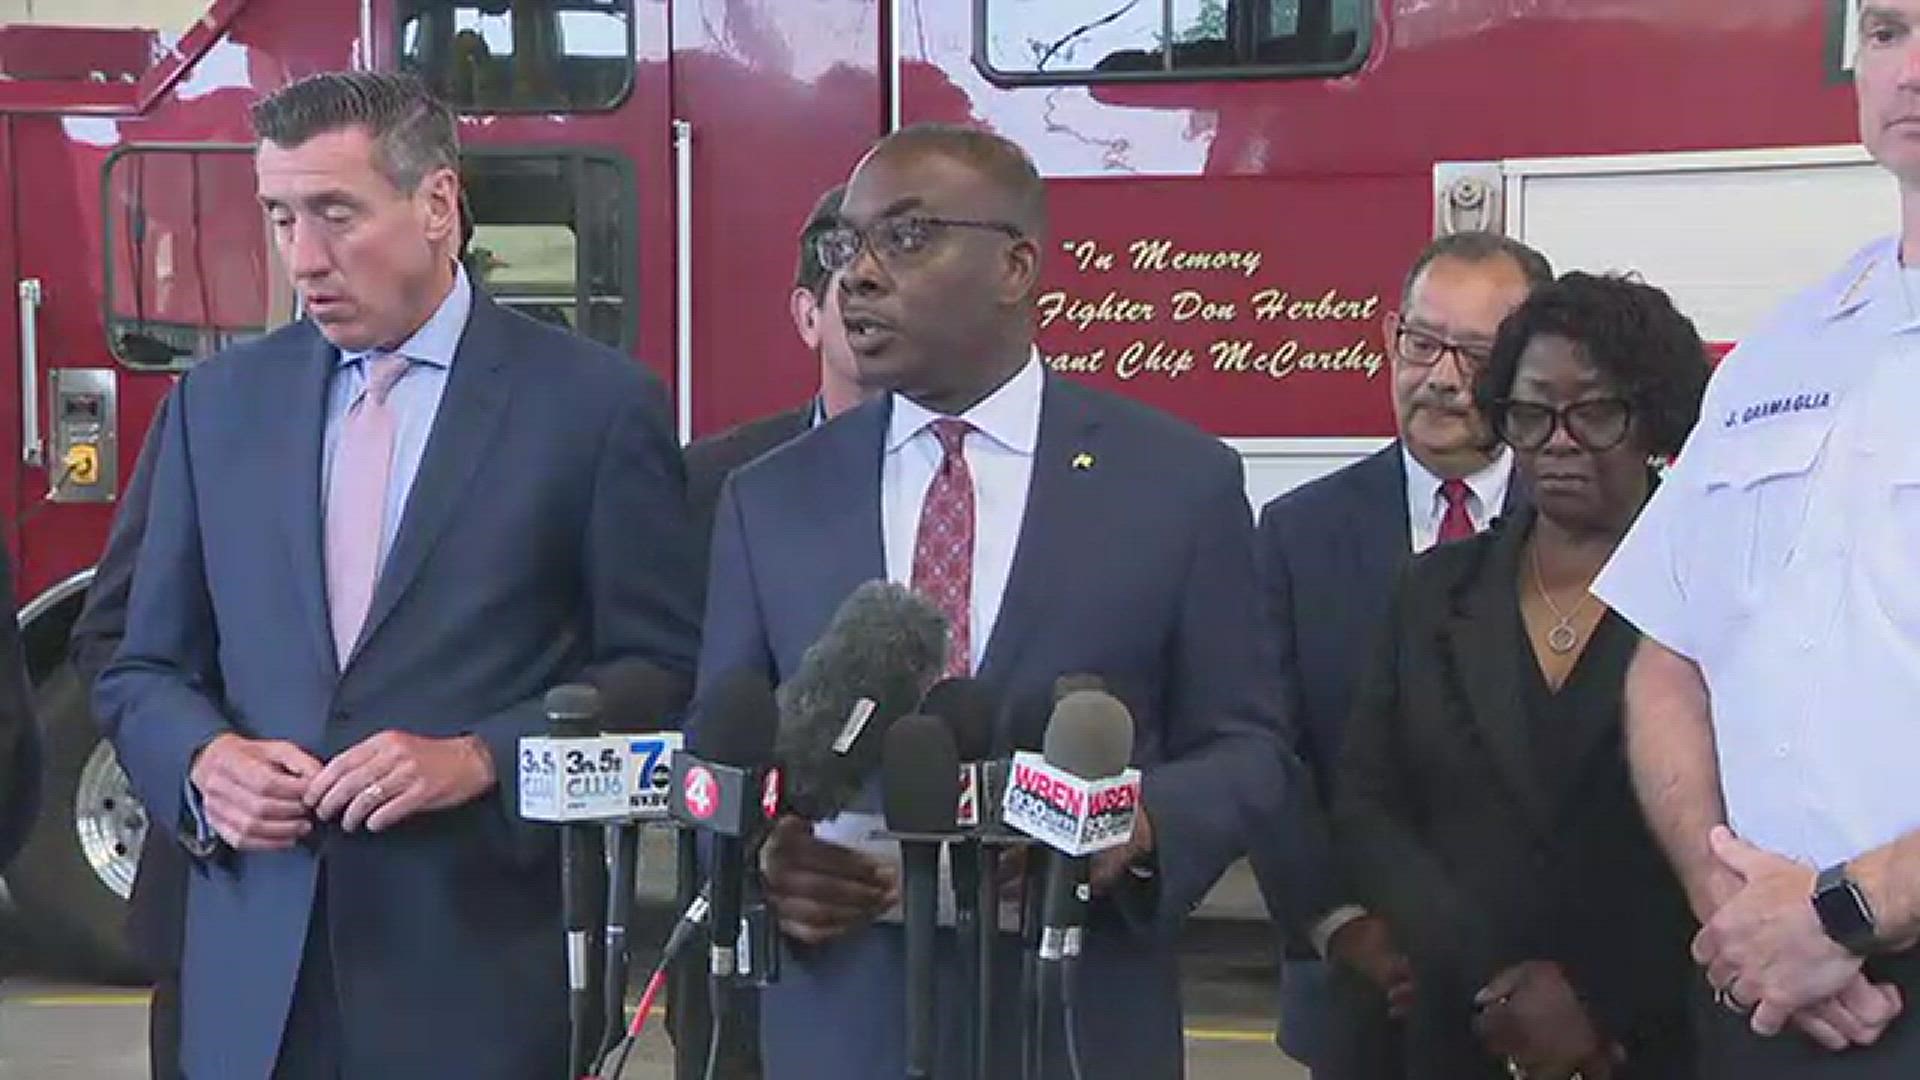 Buffalo Police, local leaders provide update on investigation, available resources